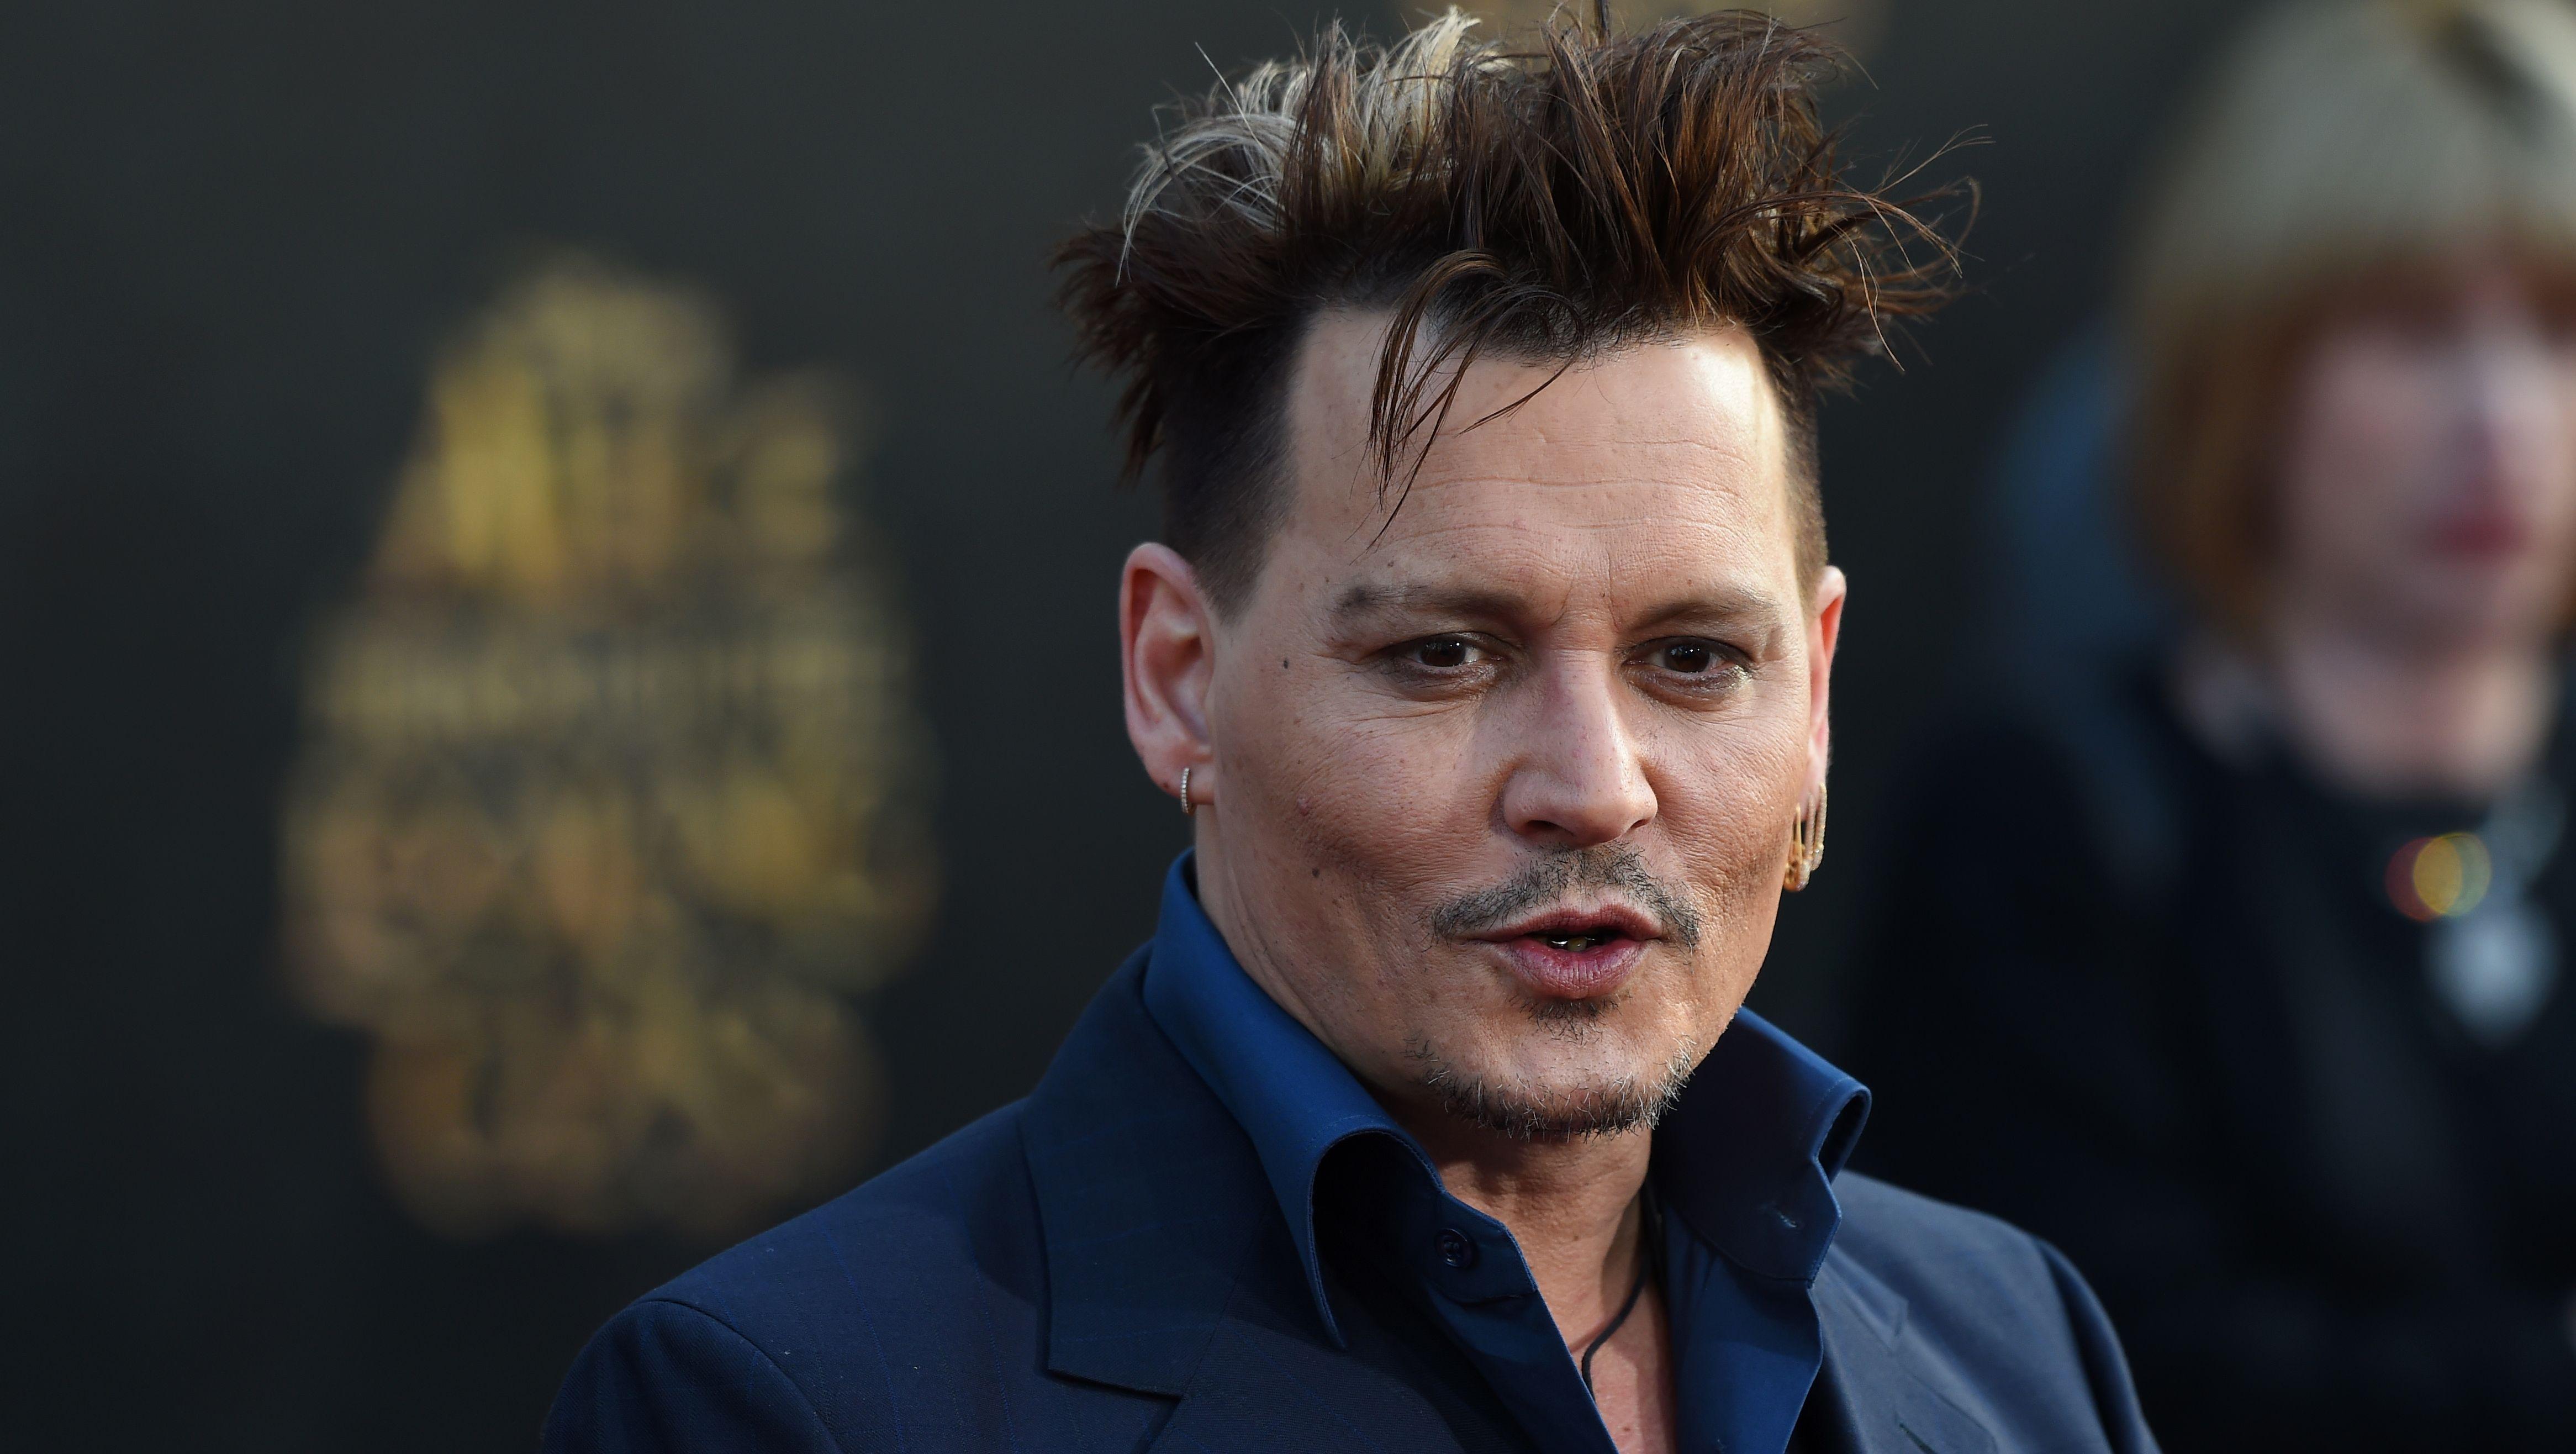 Johnny Depp sues ex-managers alleging millions in losses - CBS News